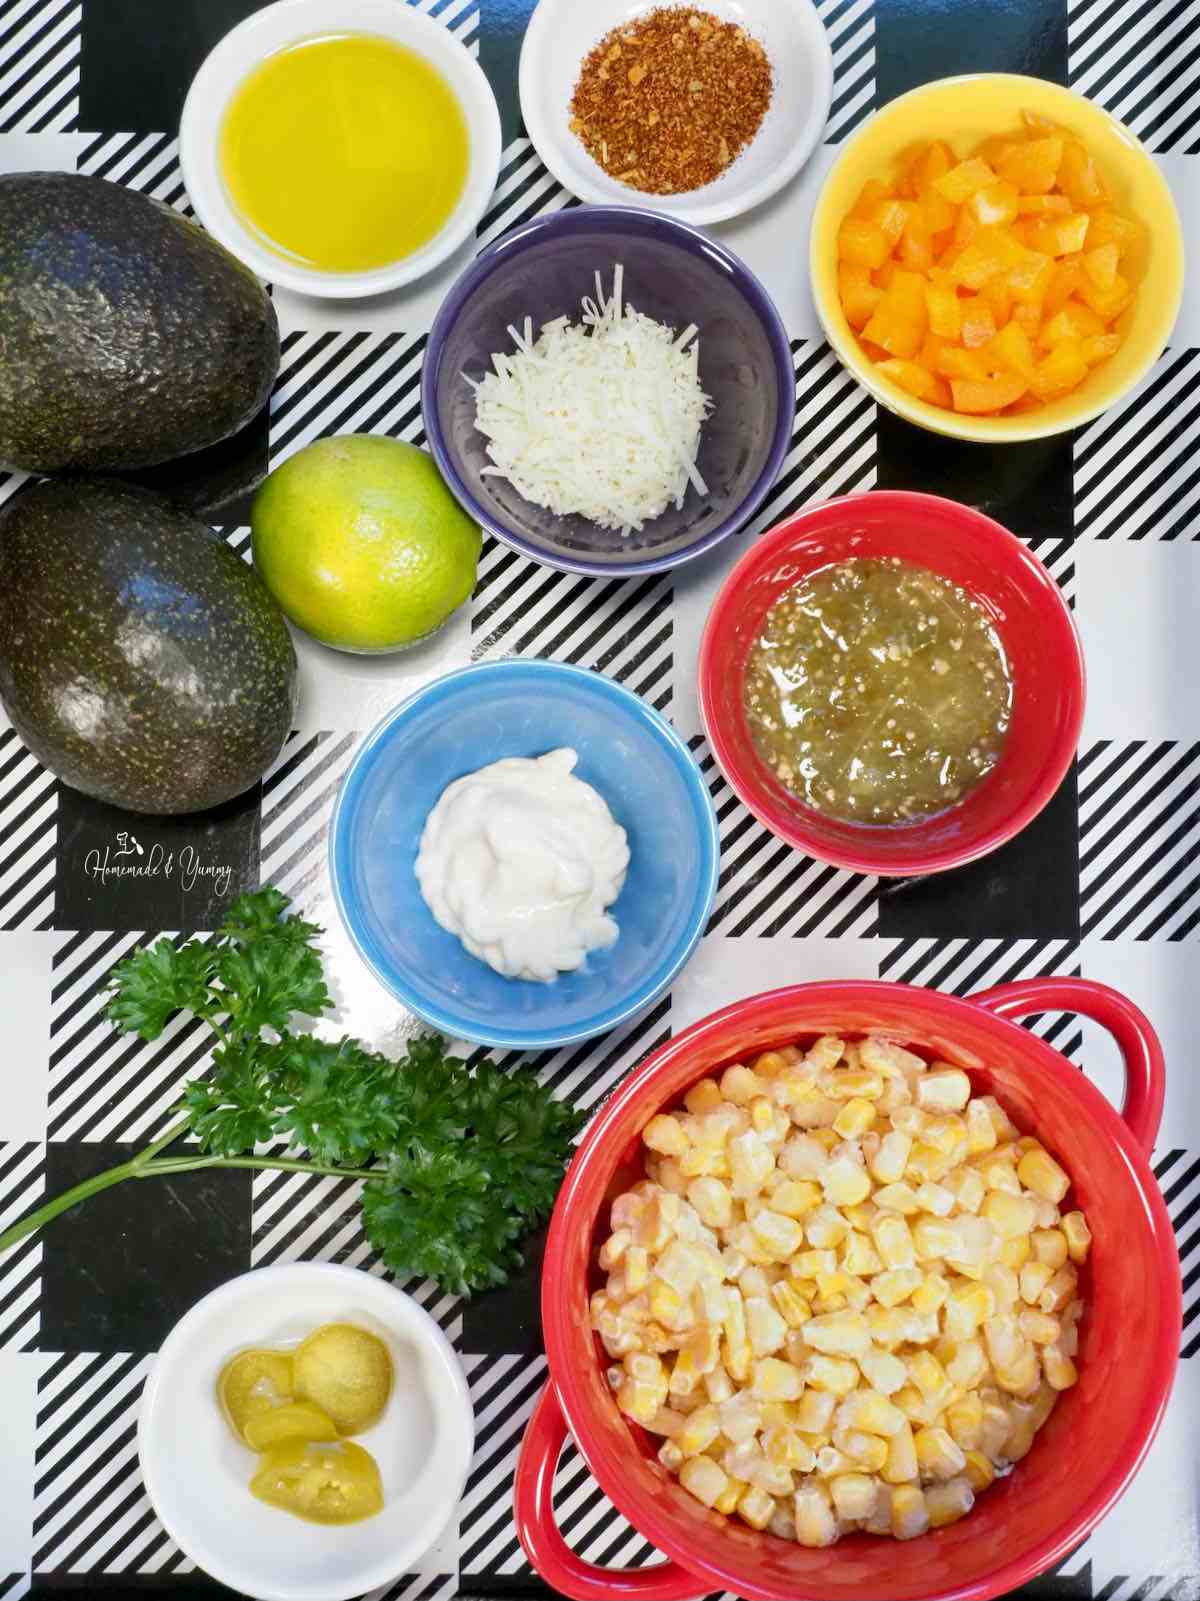 Ingredients for making grilled avocado recipe.